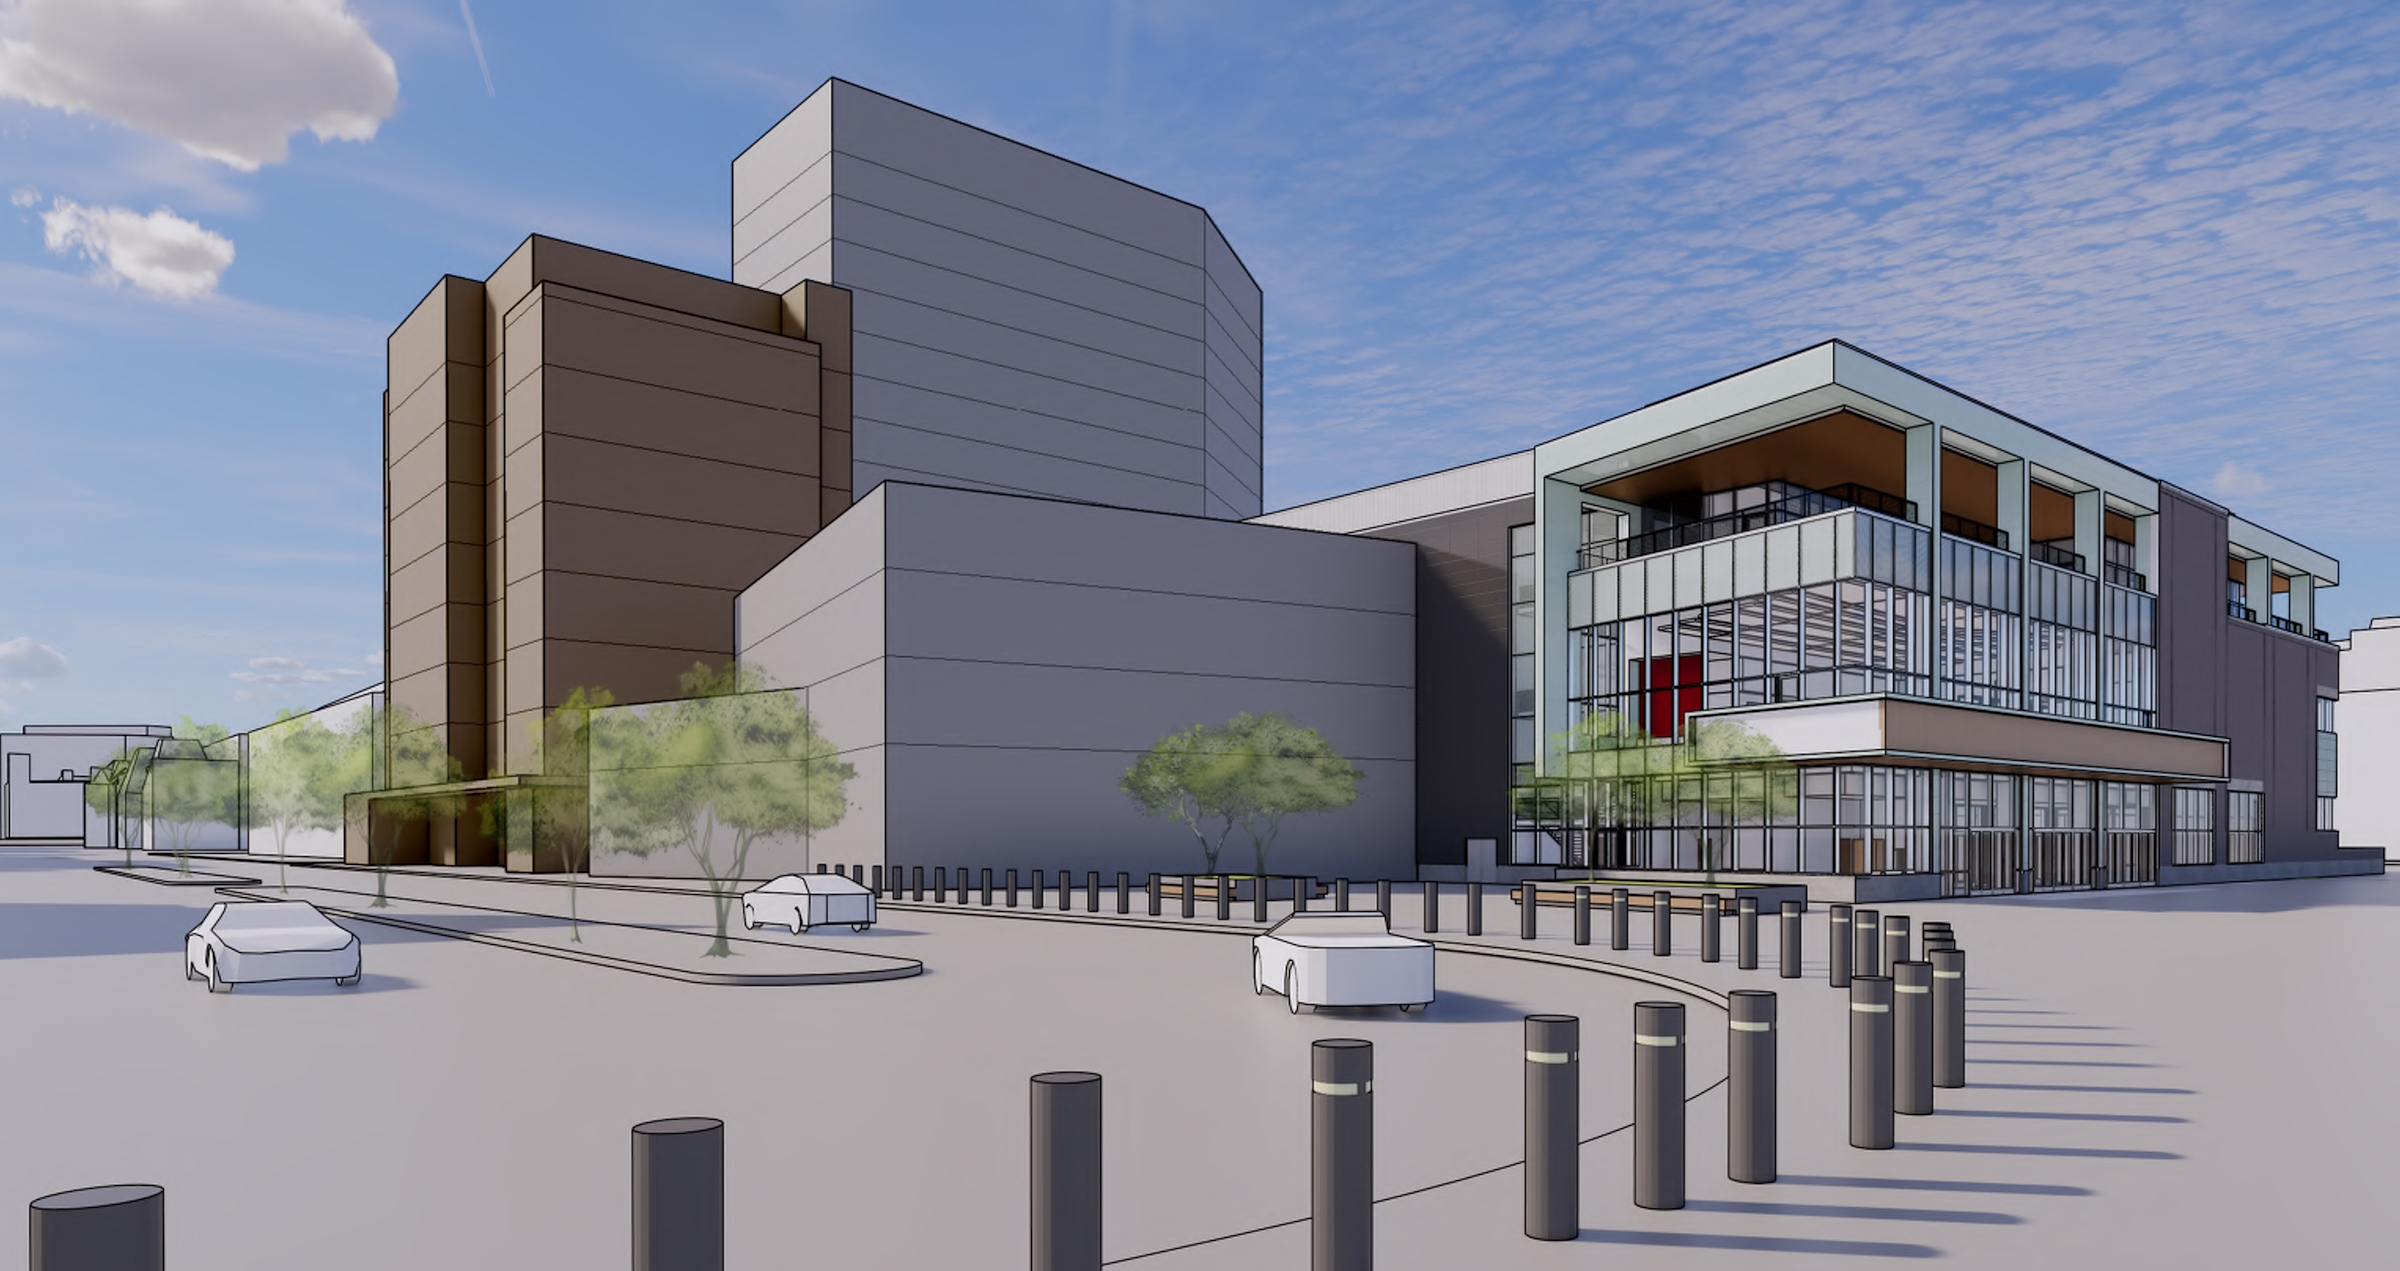 Conceptual rendering of revised FPC Live Deer District concert venue. Rendering by Eppstein Uhen Architects.